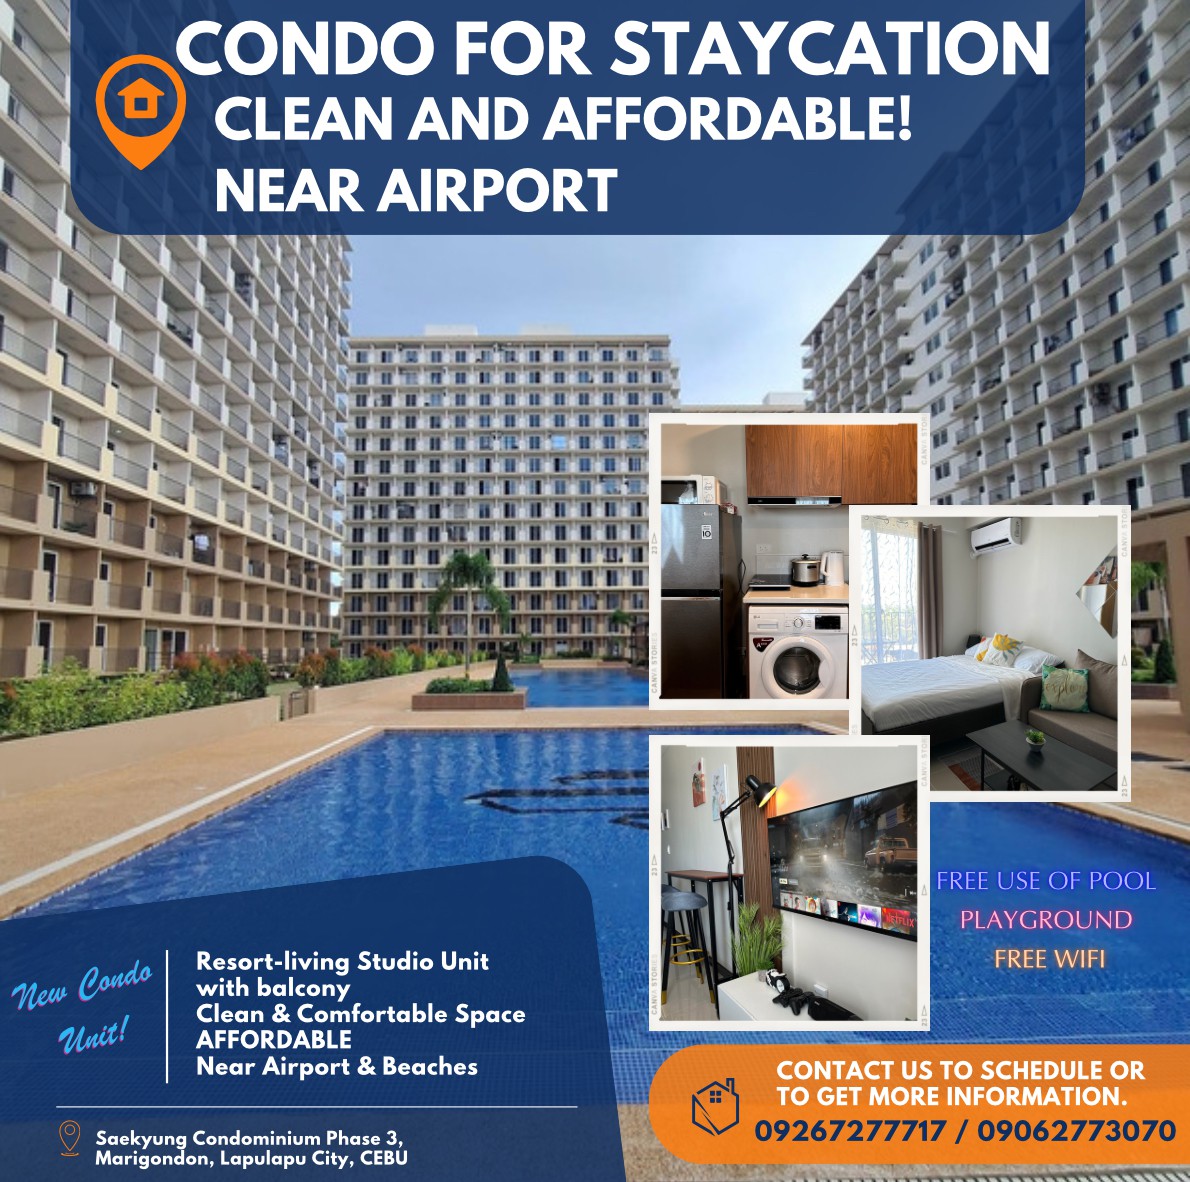 Affordable Condo for Staycation!